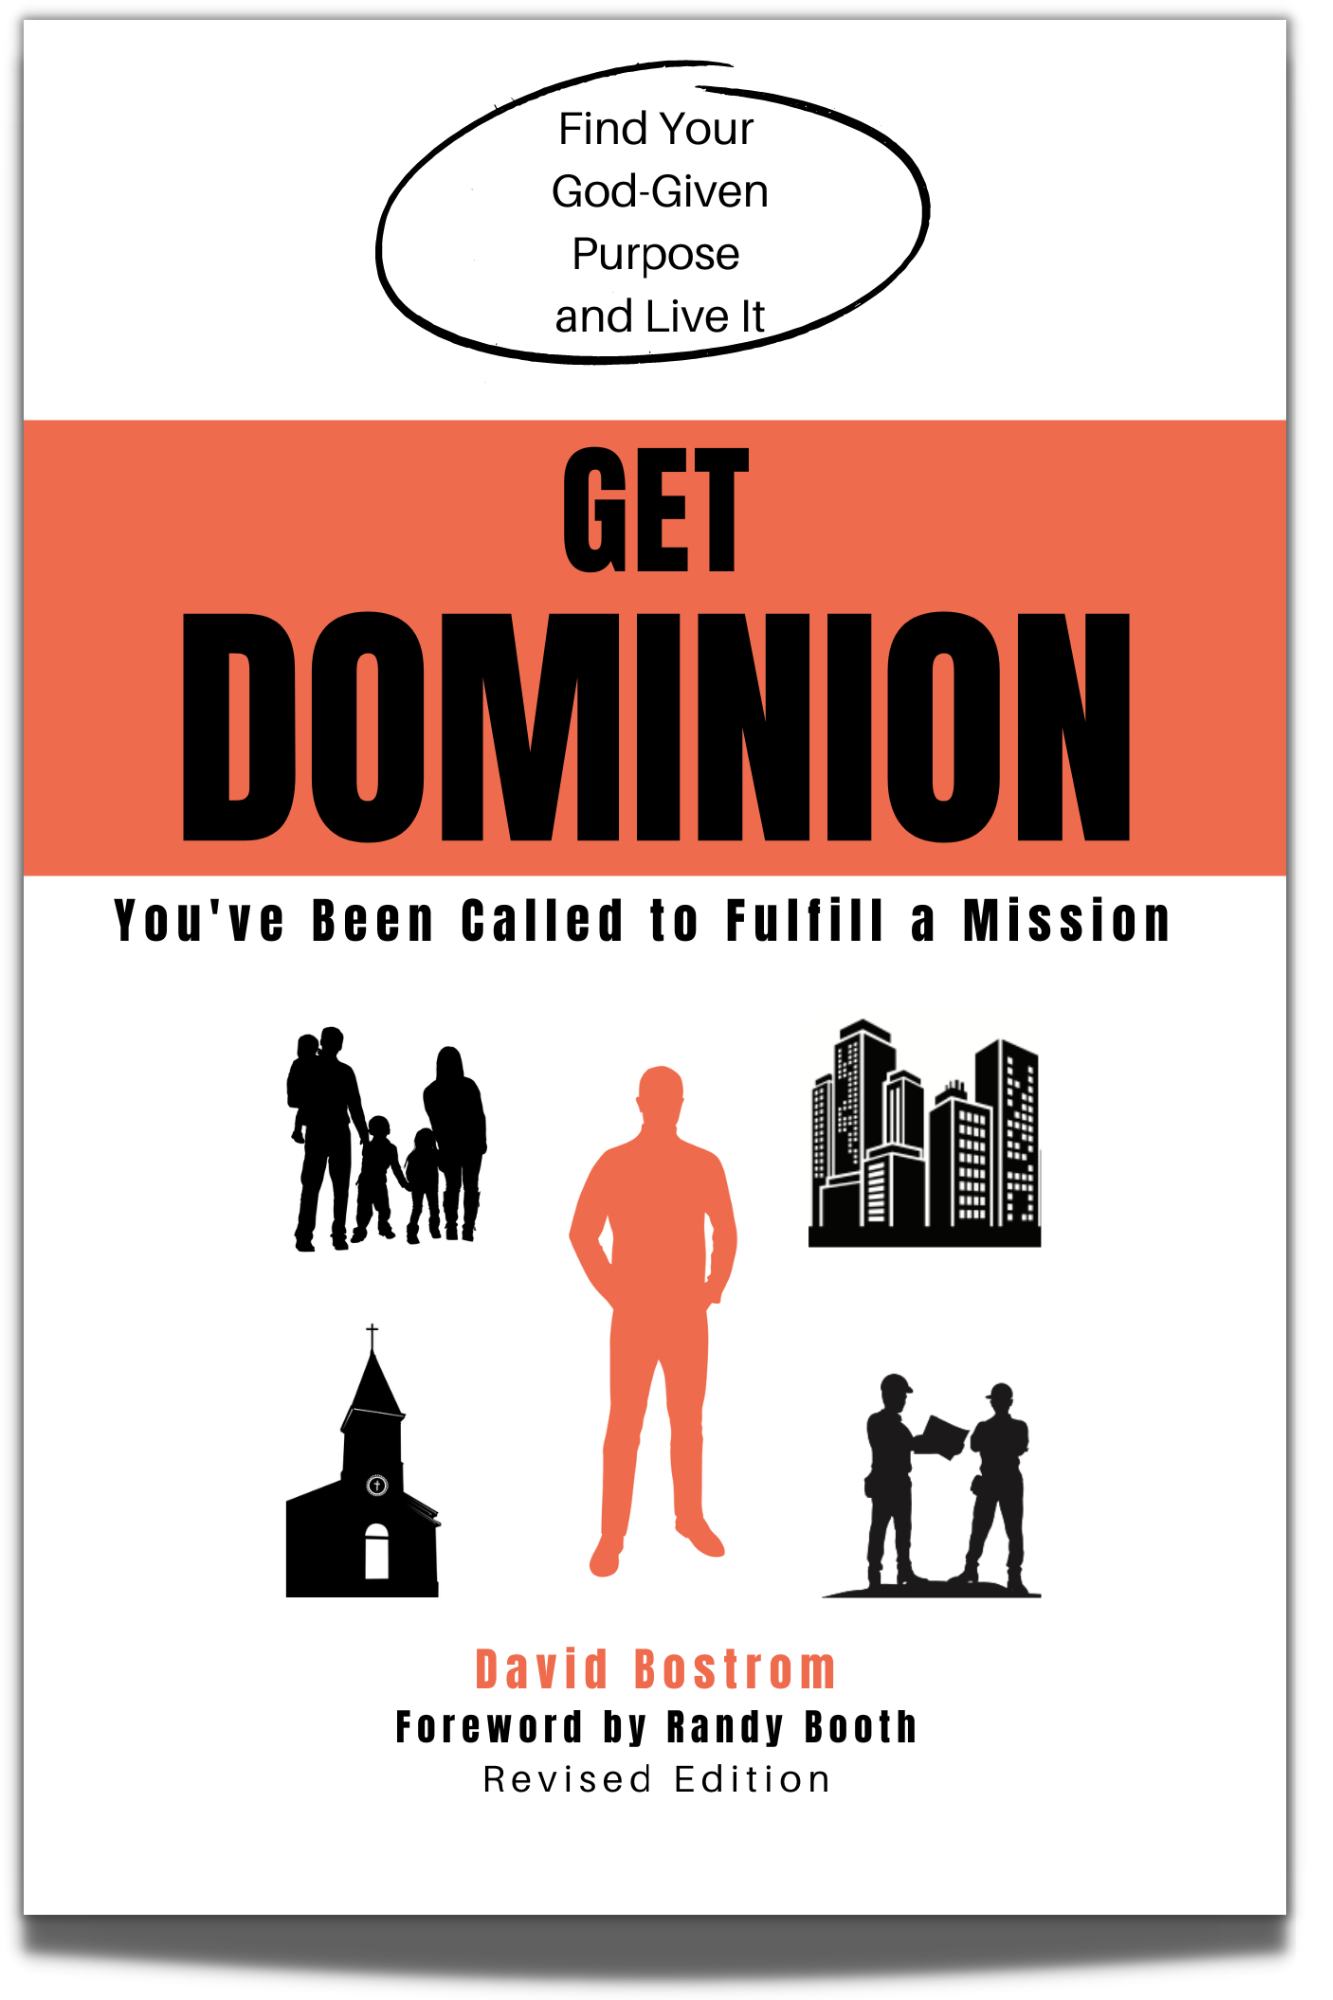 Get Dominion | The Book | You've Been Called to Fulfill a Mission | David Bostrom | Made for Dominion Ministries | Lakeland, FL